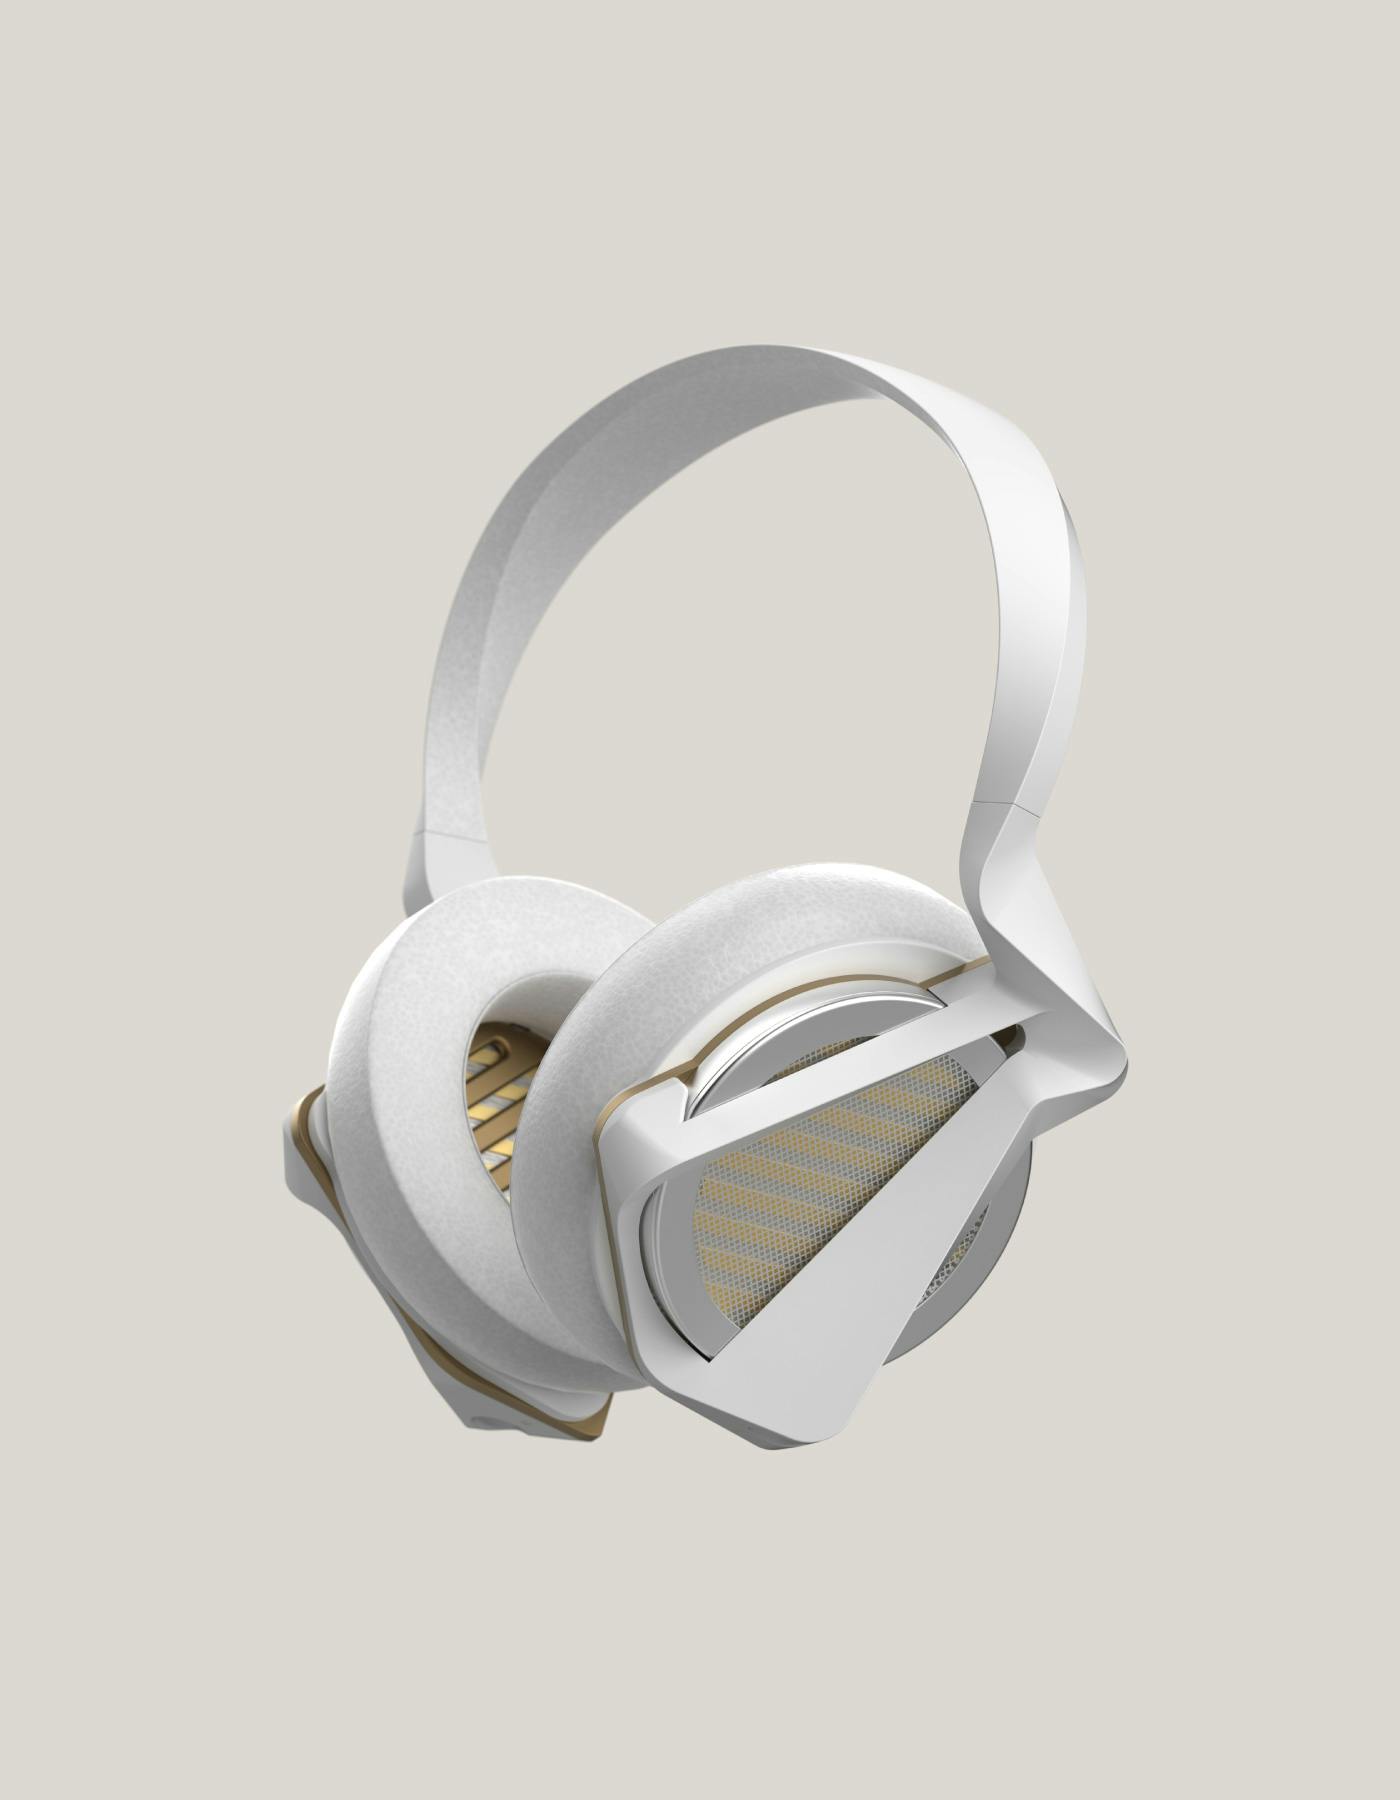 White headphones with dark gold accents.